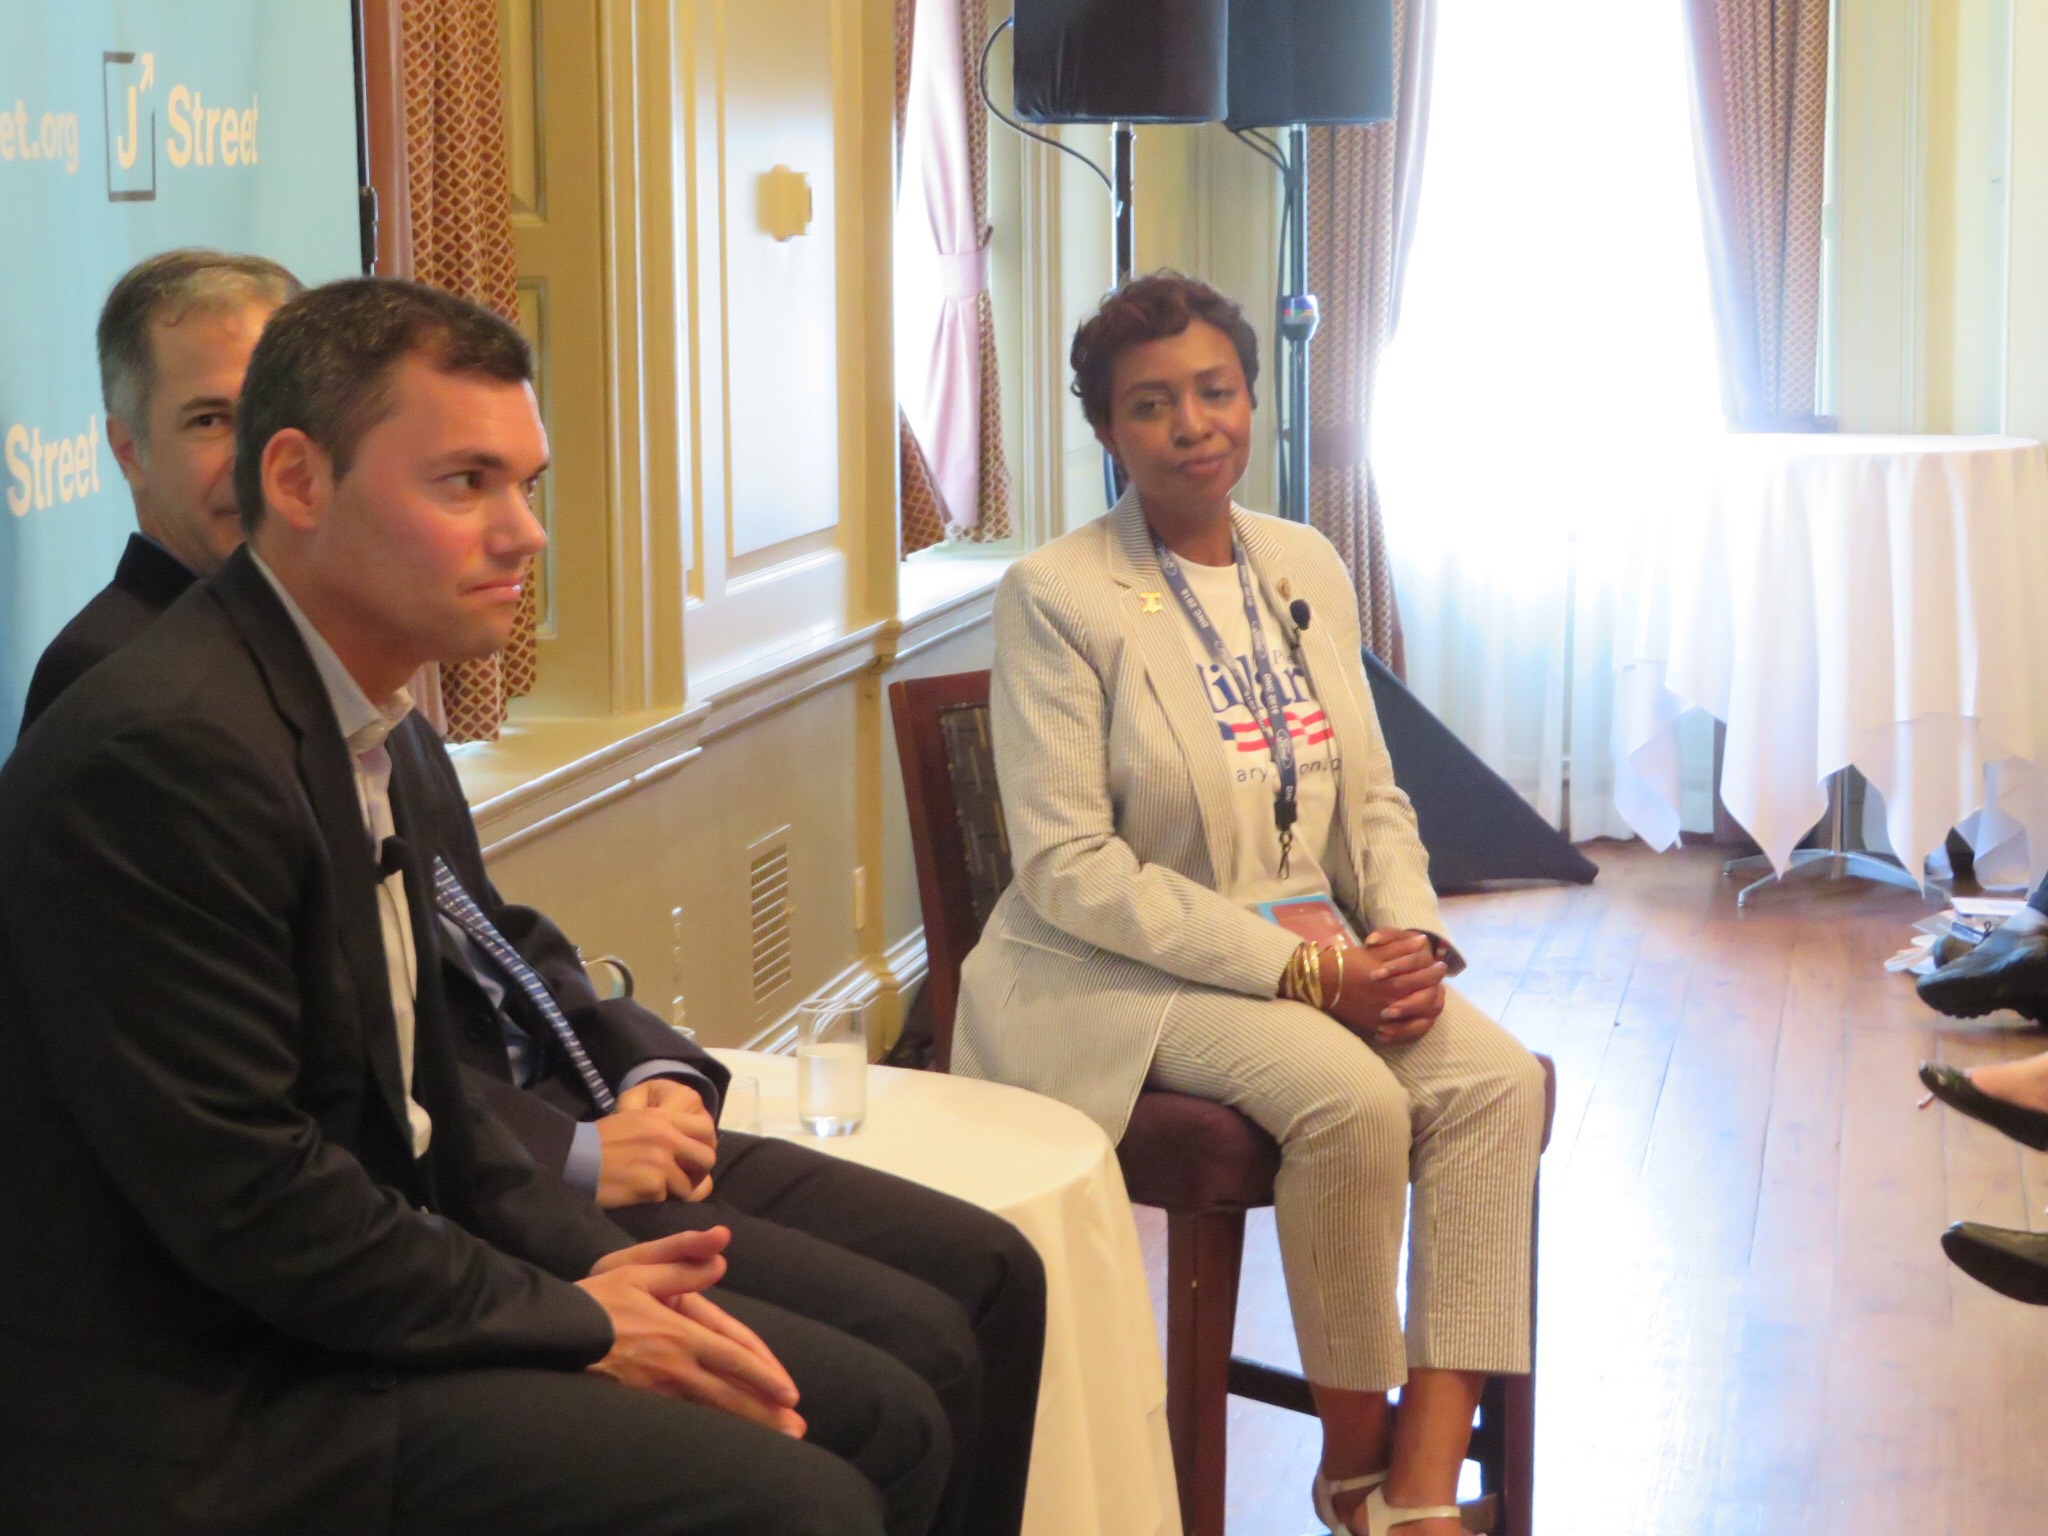 Rep. Yvette Clarke, D-N.Y., speaks Tuesday July 26 at a J Street panel near the Democratic National Convention. At left is Peter Beinart.